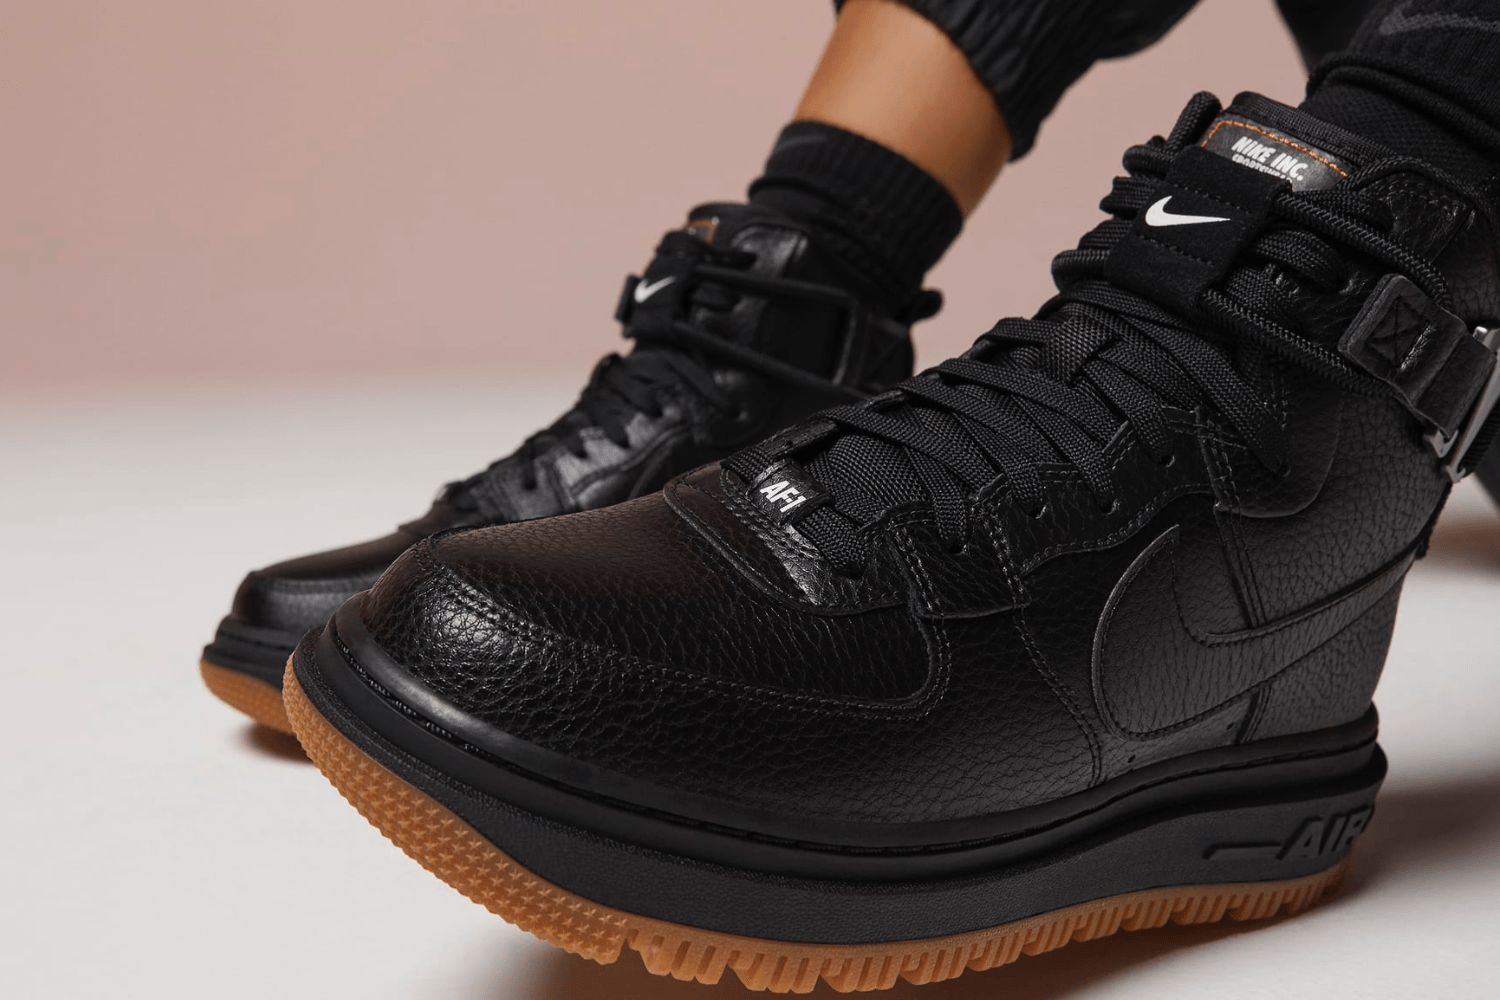 Get ready for winter season with these trend sneaker designs